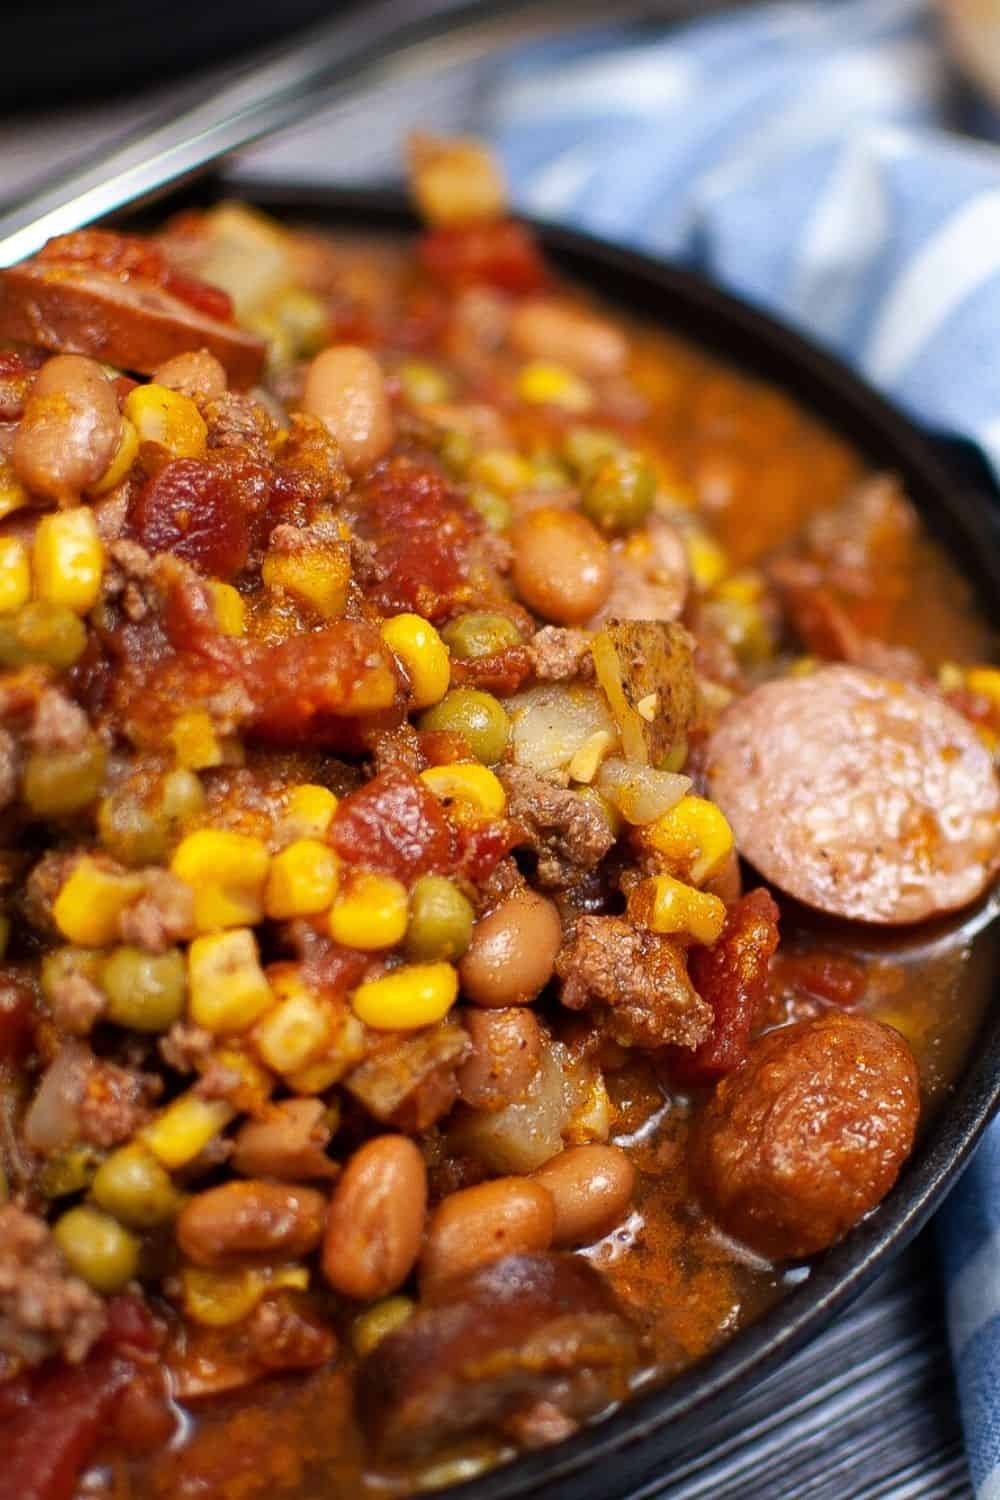 close-up view of the corn, peas, beans, tomatoes, kielbasa, potatoes, and ground beef that make up the cowboy stew.